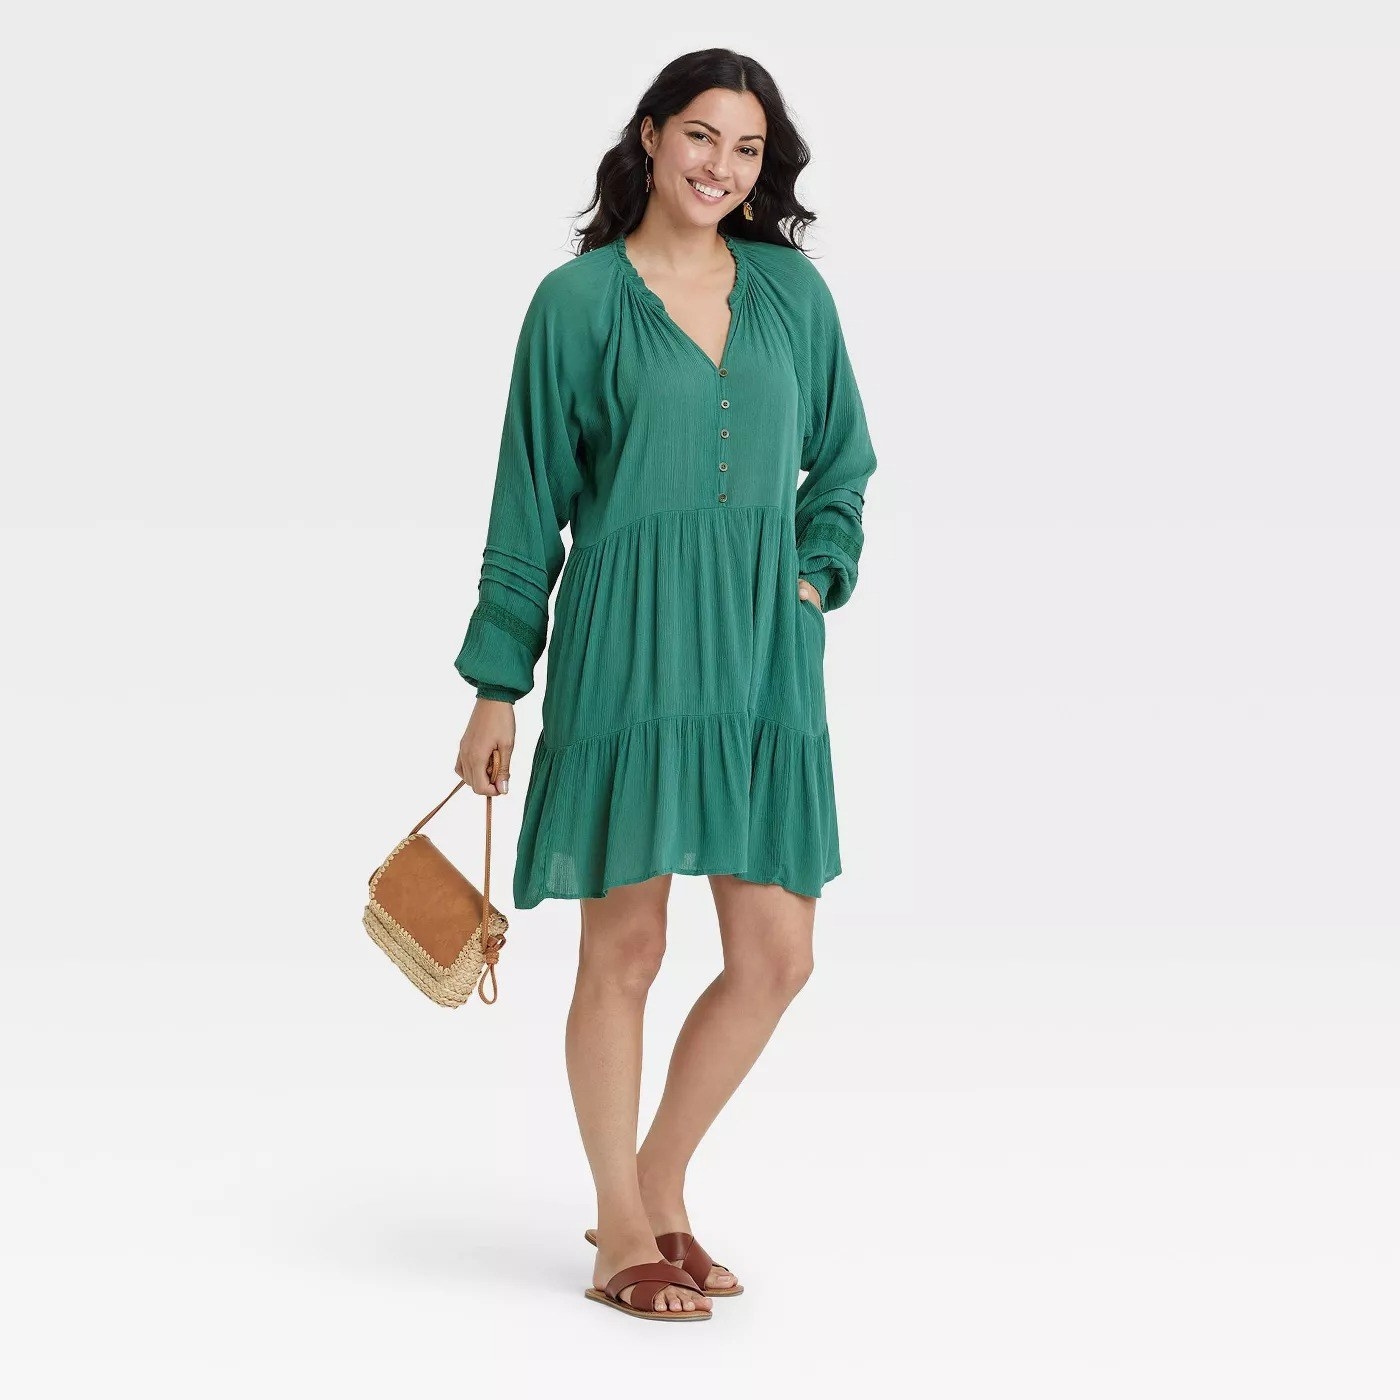 Model wearing green  midi dress with tiered skirt, stops above the knee